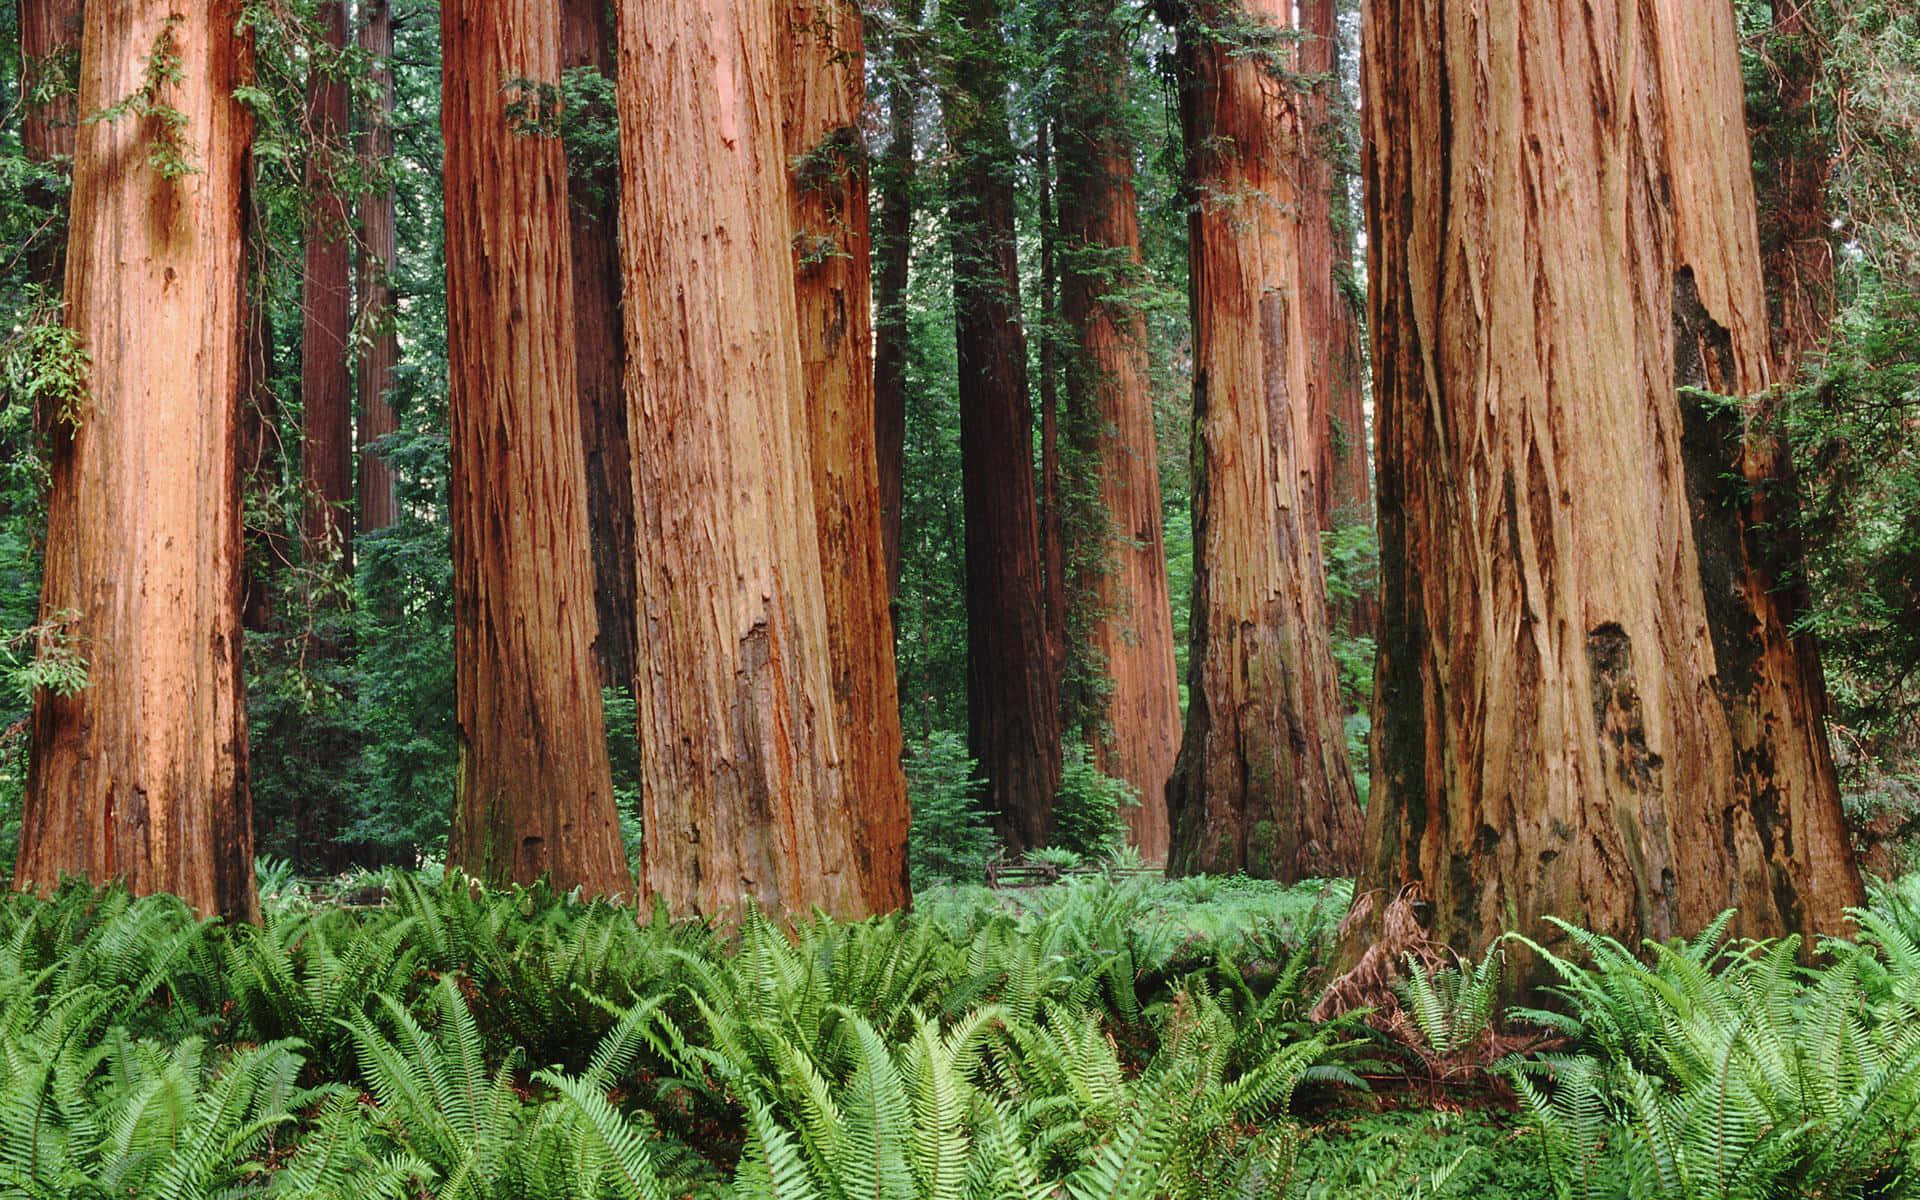 Majestic Redwood Trees Blooming in Springtime